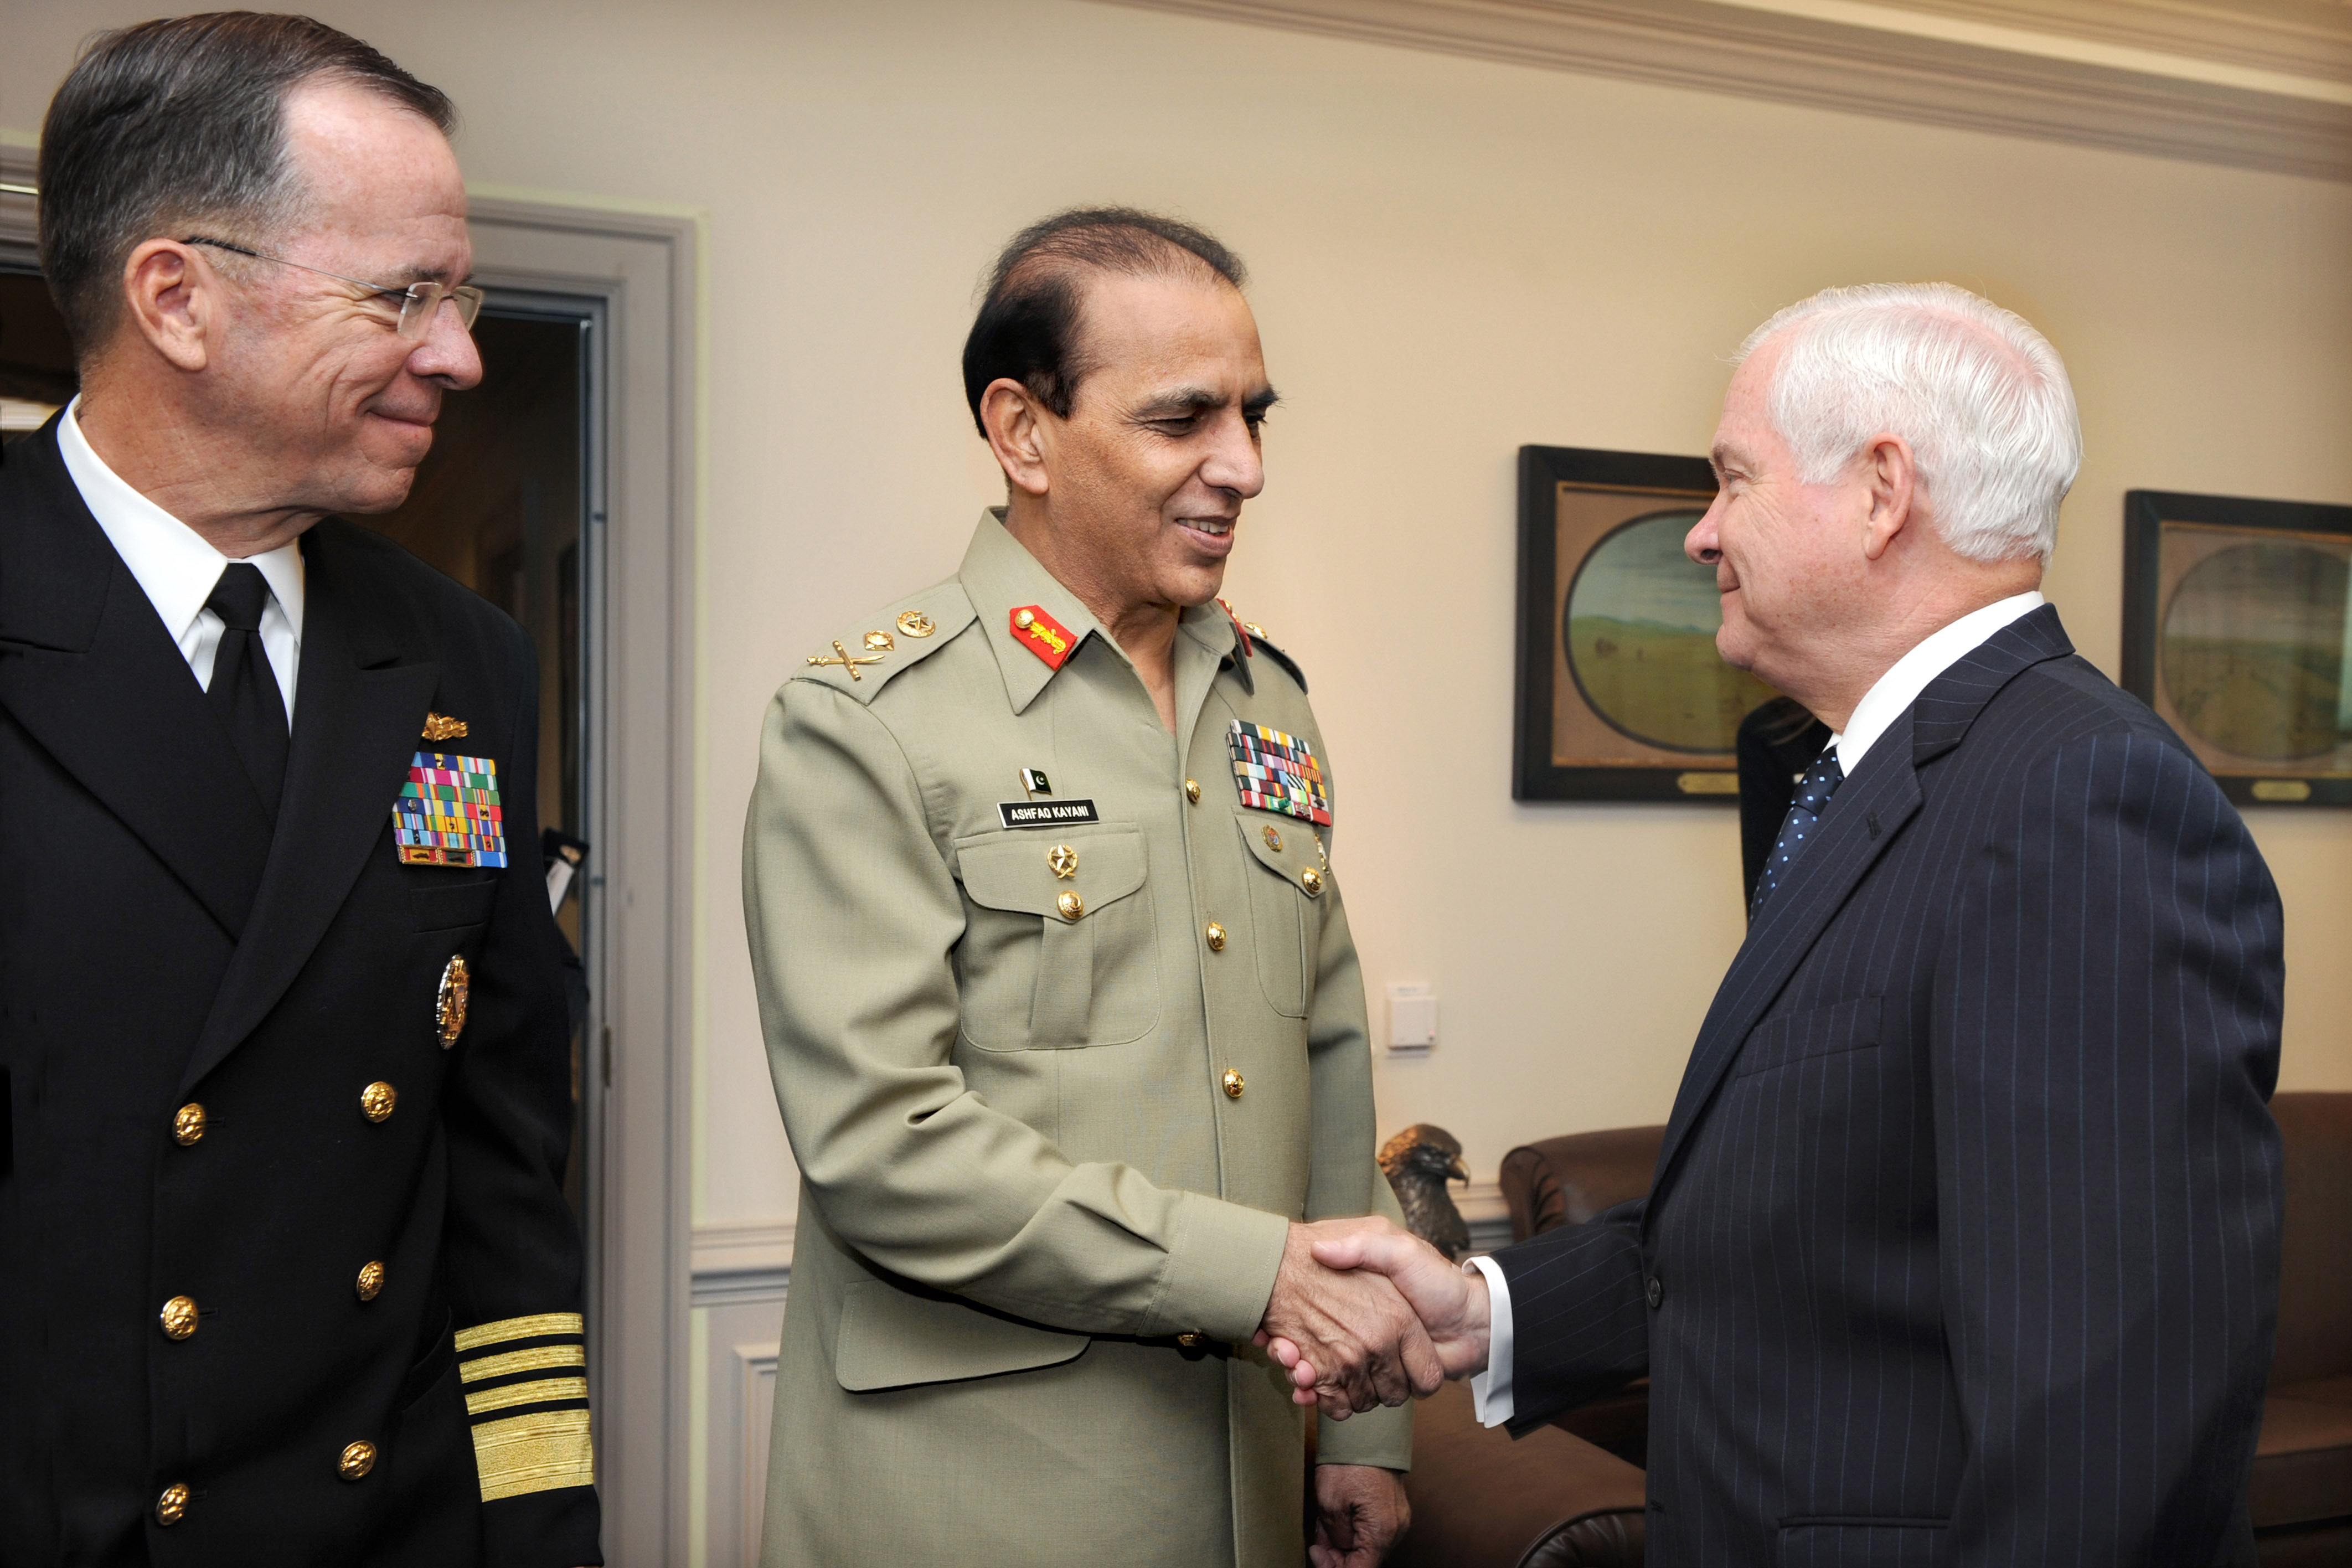 Defense.gov News Photo 101020-D-9880W-003 - Secretary of Defense Robert M. Gates right welcomes Chief of the Pakistani Army Staff Gen. Ashfaq Kayani to his Pentagon office for security